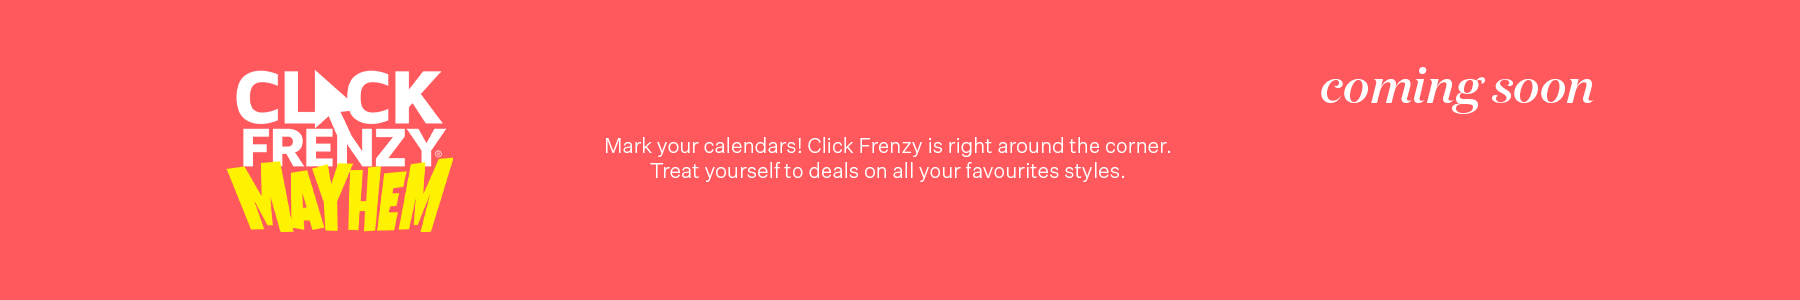 Click Frenzy Mayhem. Mark your calendars! Treat yourself to deals on all your favourites style.